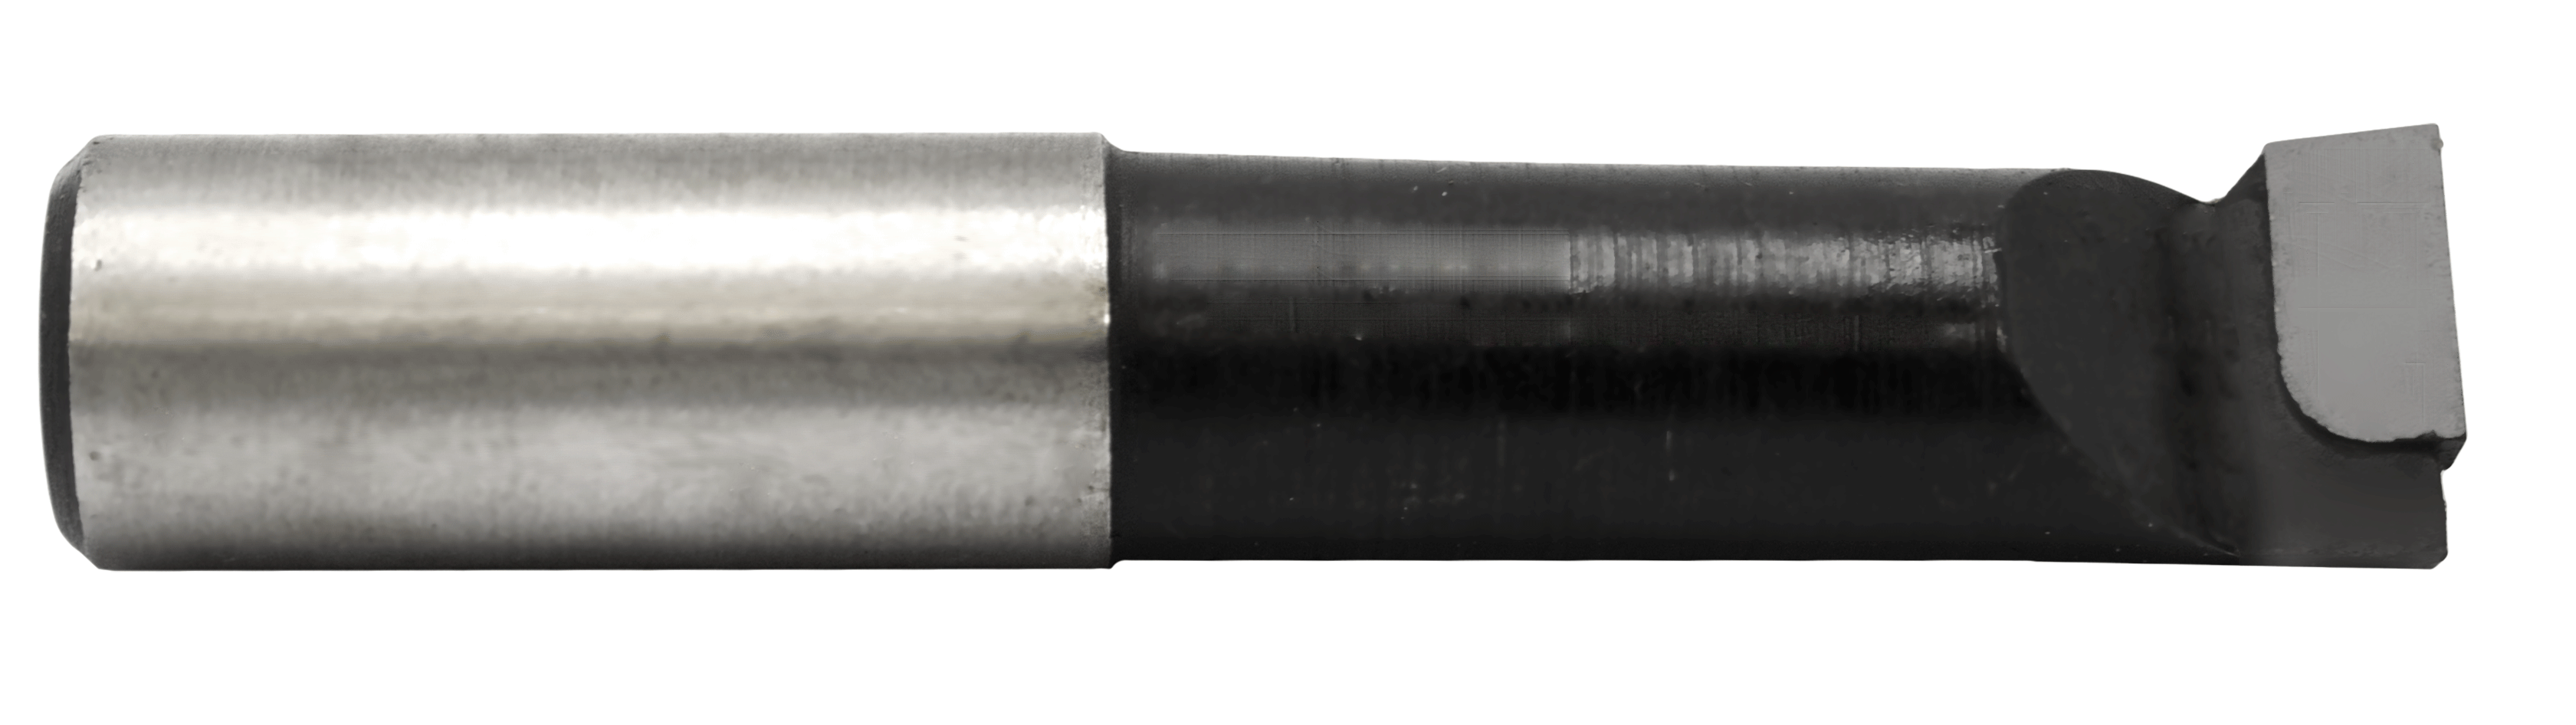 Super-Bore 1/2" C-6 for Steel Applications